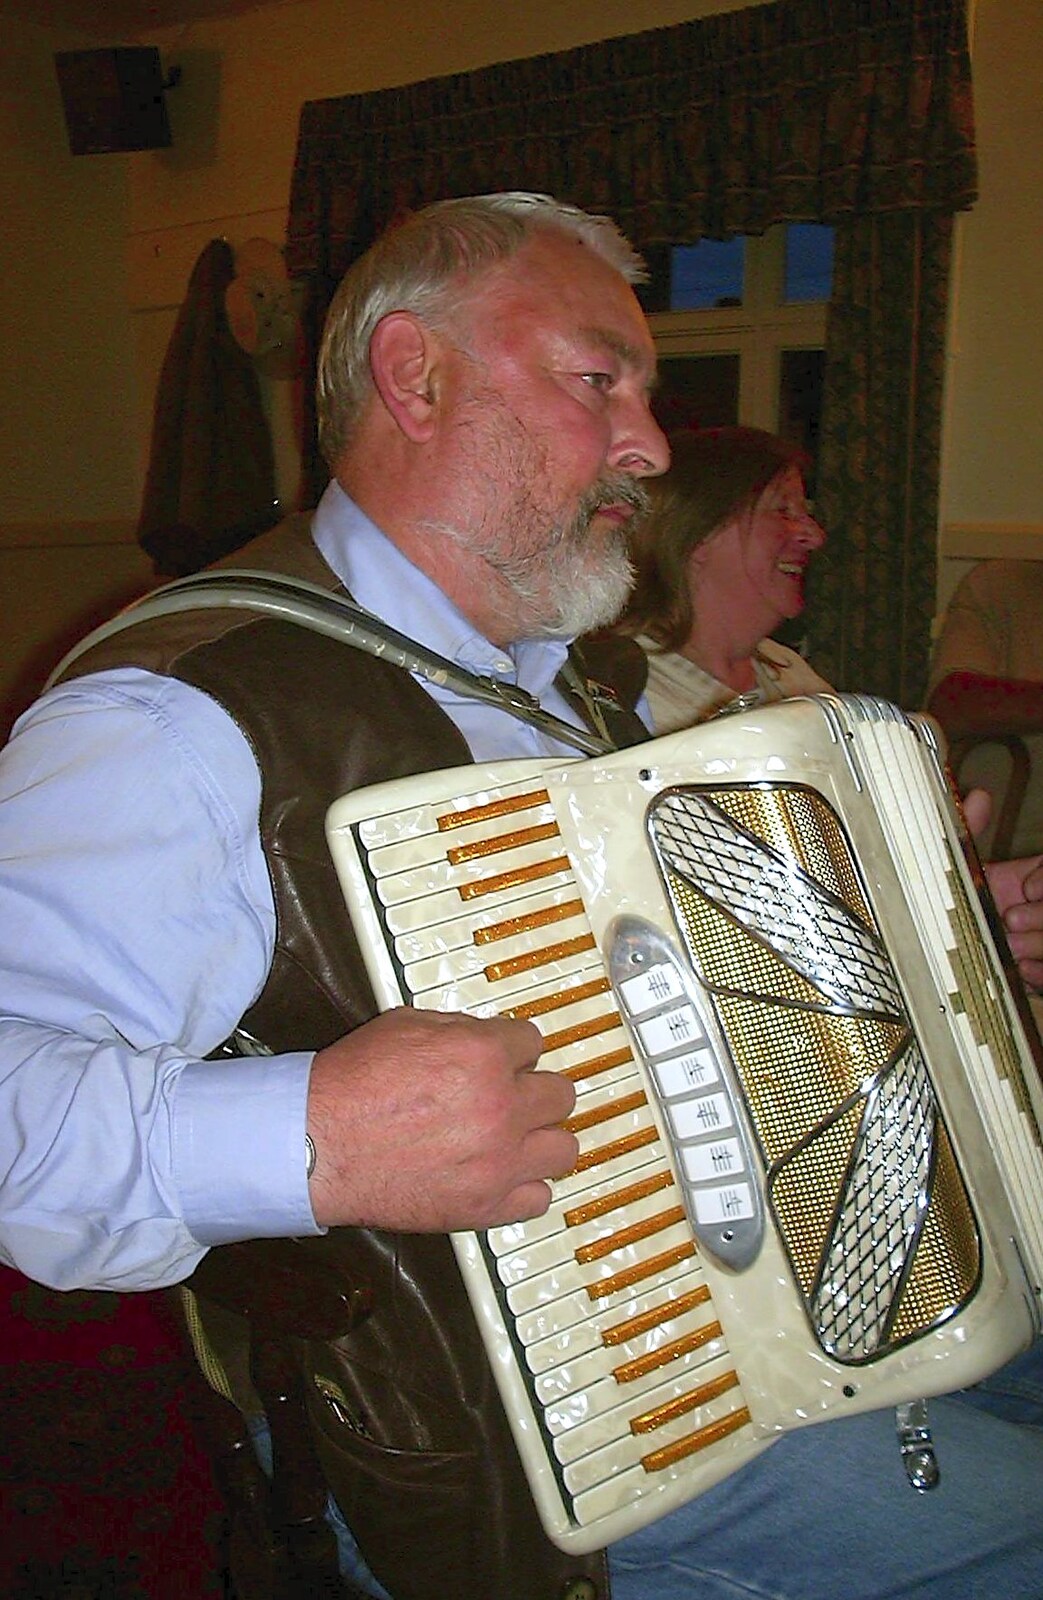 The BBs do a Wedding Gig and the BSCC go Sheep Rustling, Gislingham and Redgrave, Suffolk - 10th July 2004: Cocoa plays accordion